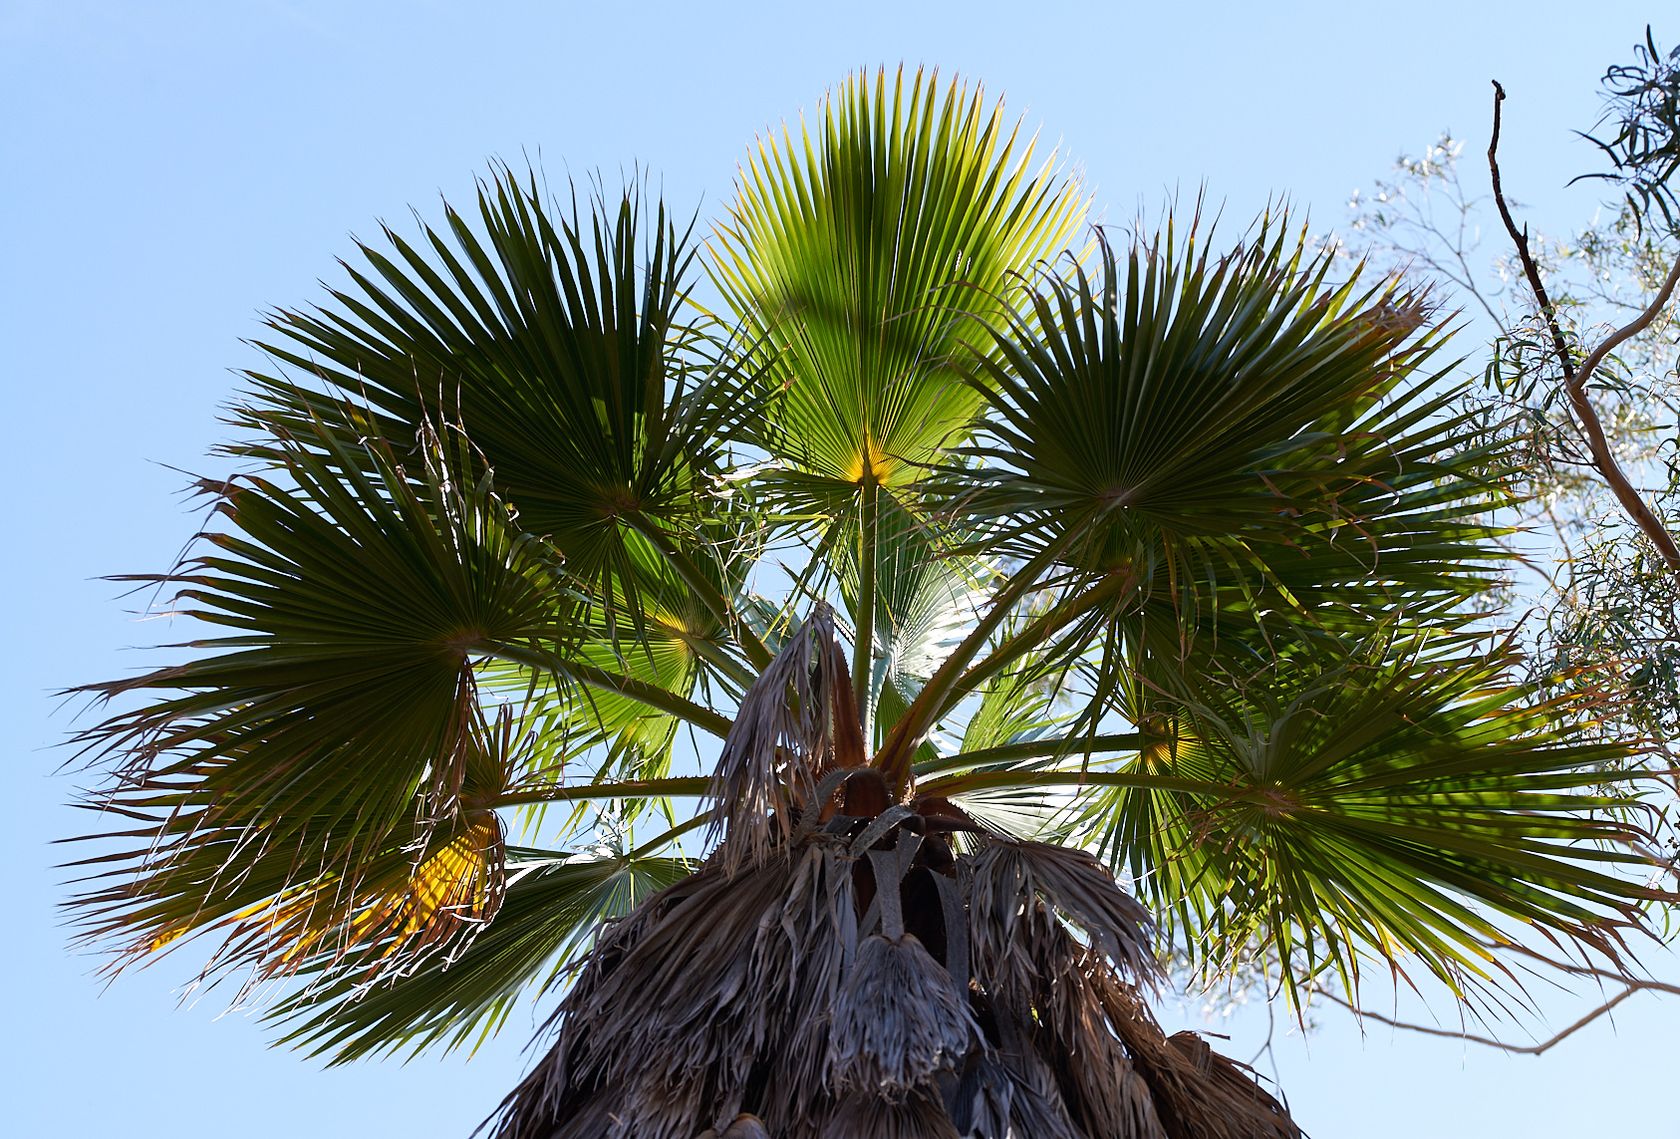 Palm tree viewed from a low angle